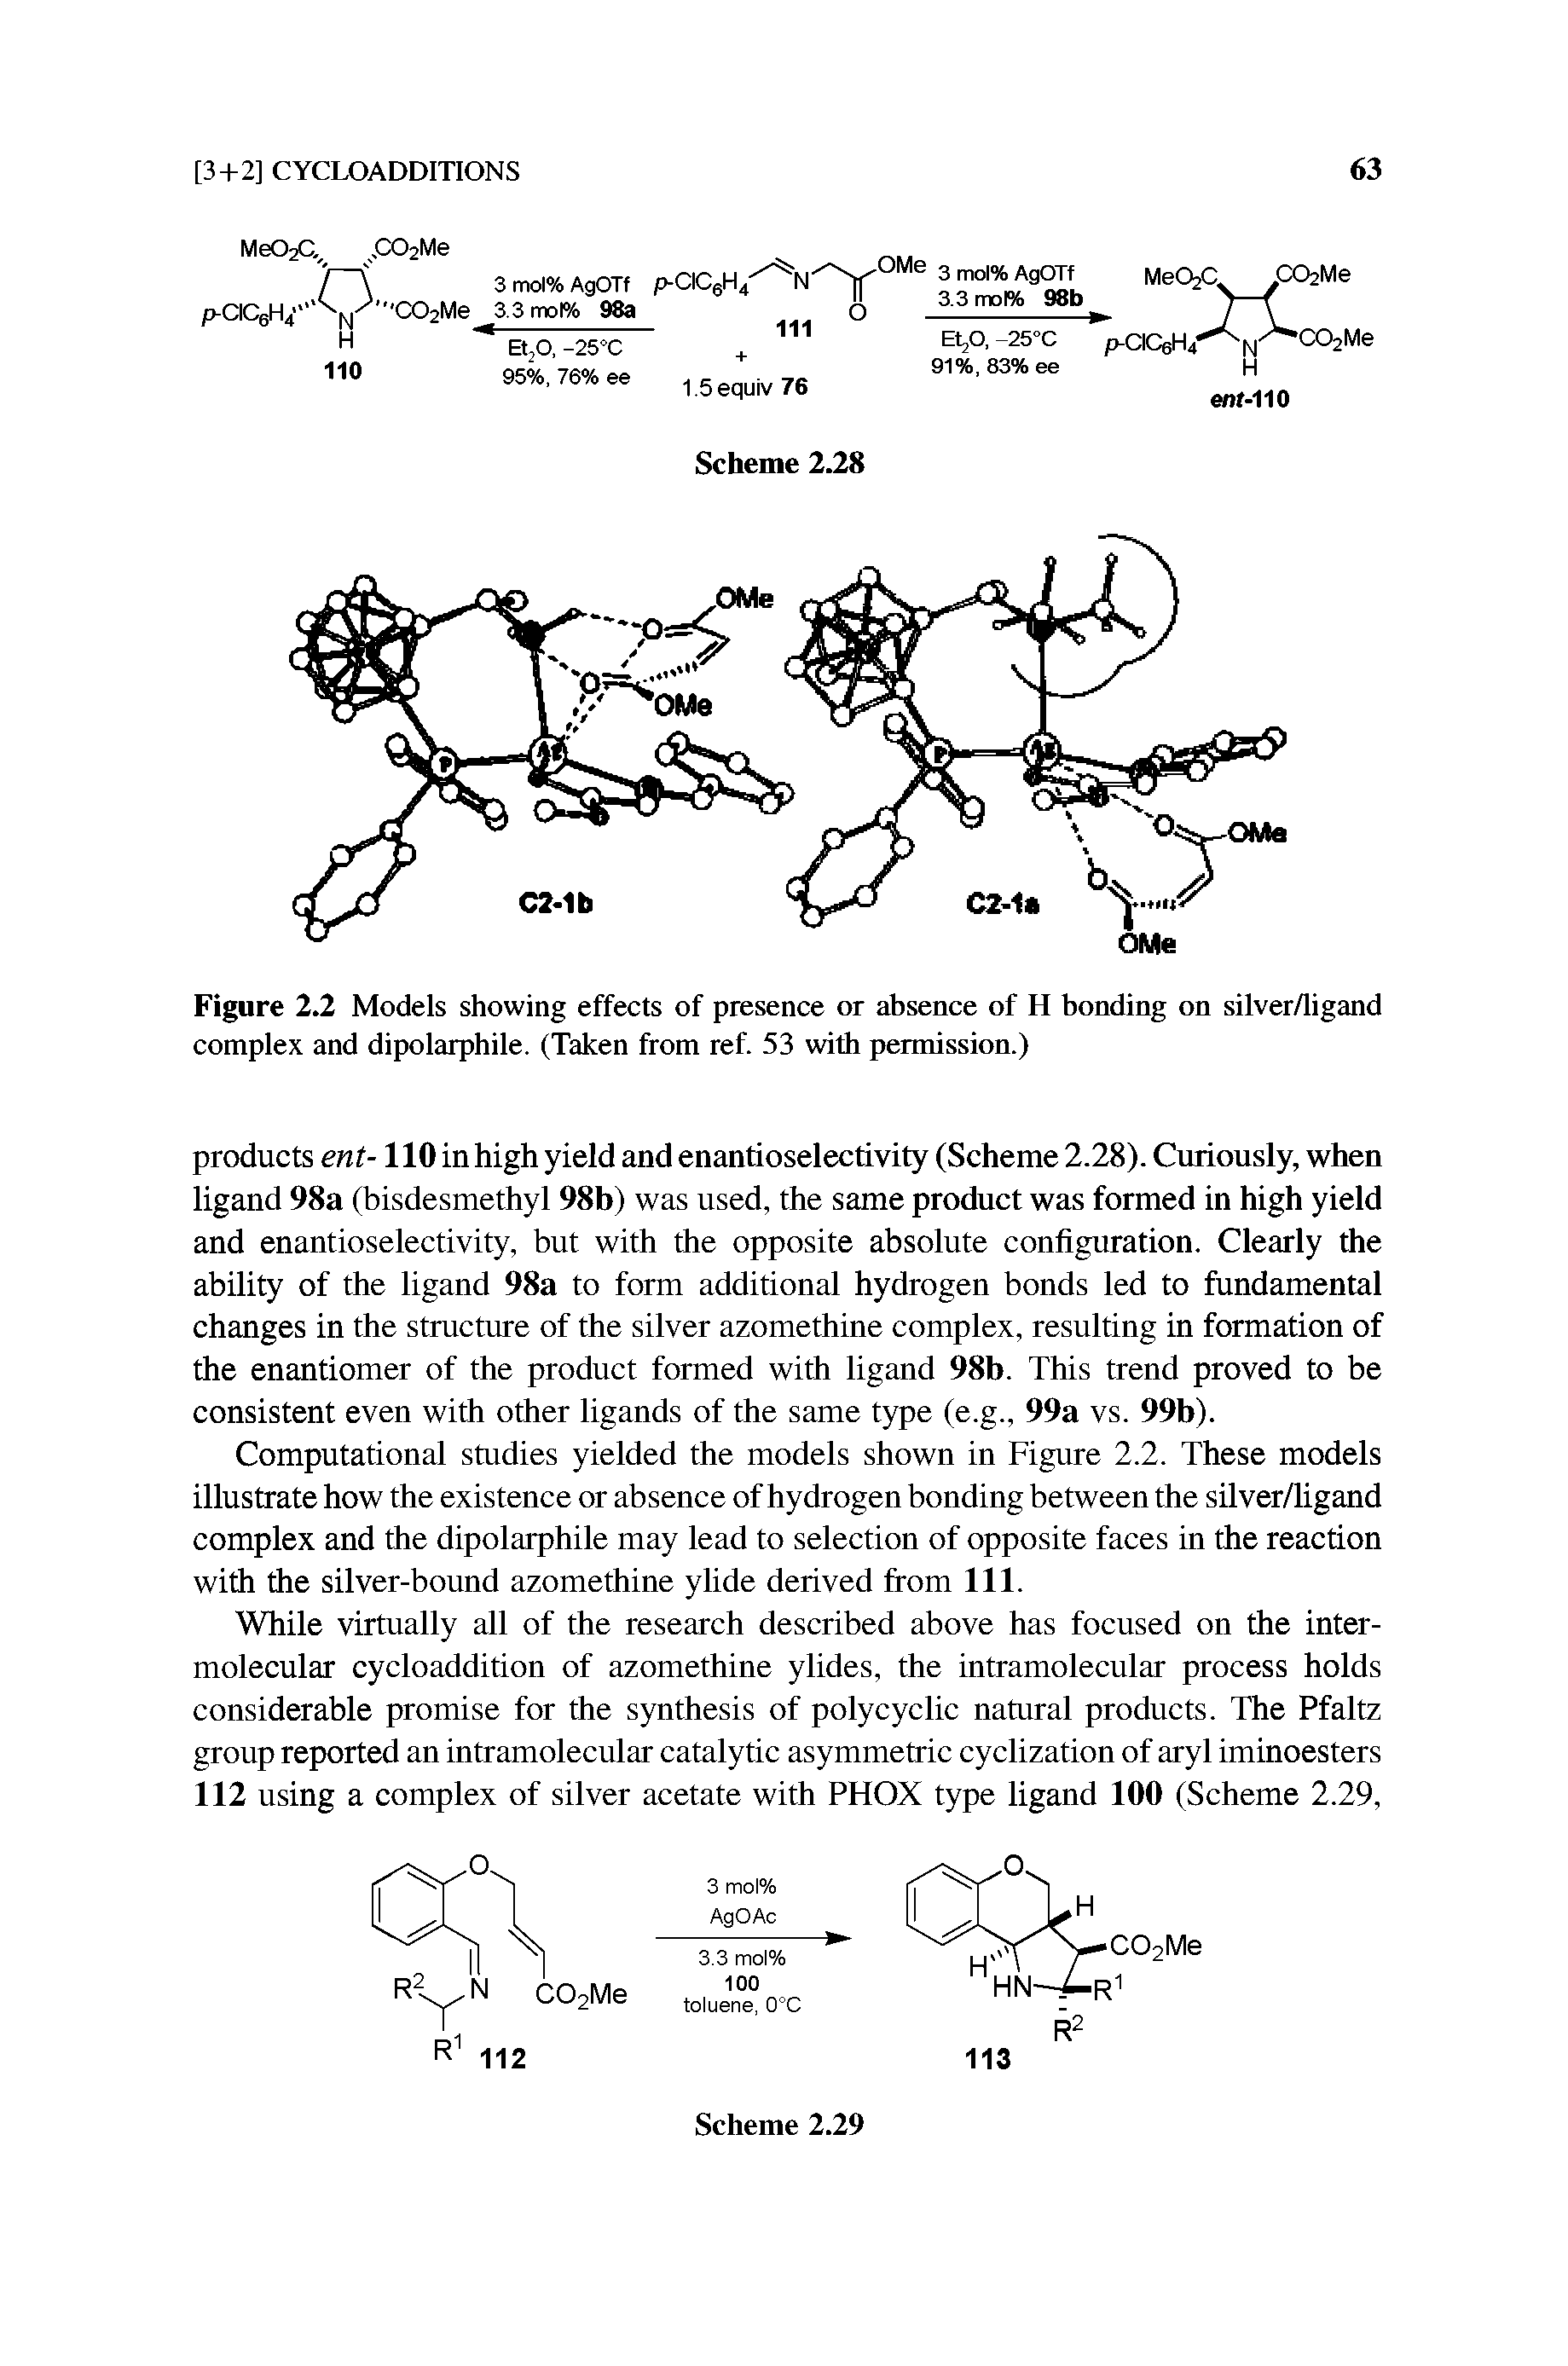 Figure 2.2 Models showing effects of presence or absence of H bonding on silver/ligand complex and dipolarphile. (Taken from ref. 53 with permission.)...